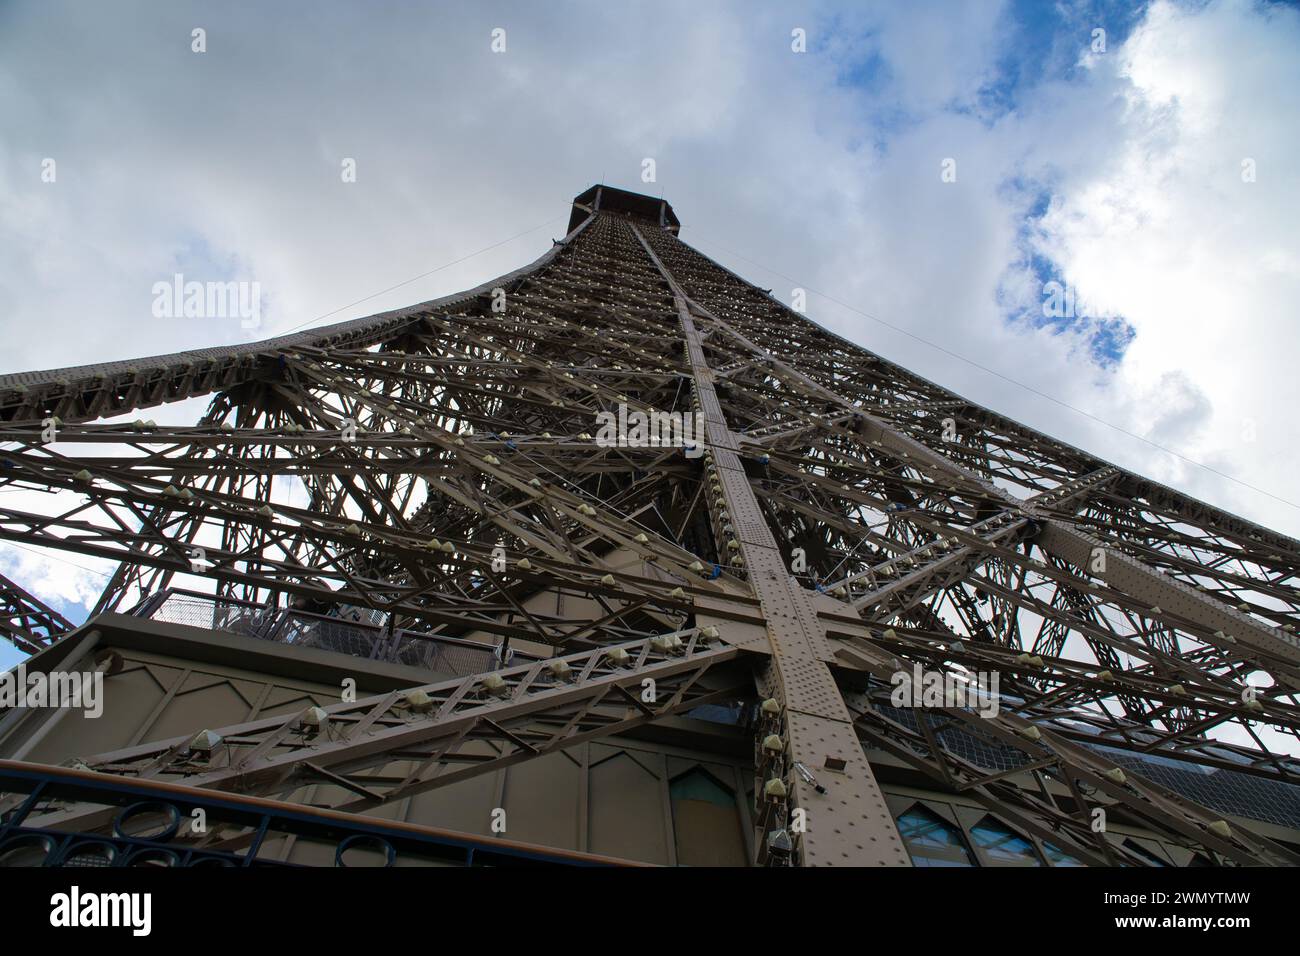 A beautiful Eiffel tower in Paris, France with cloudy sky in the backdrop. Stock Photo